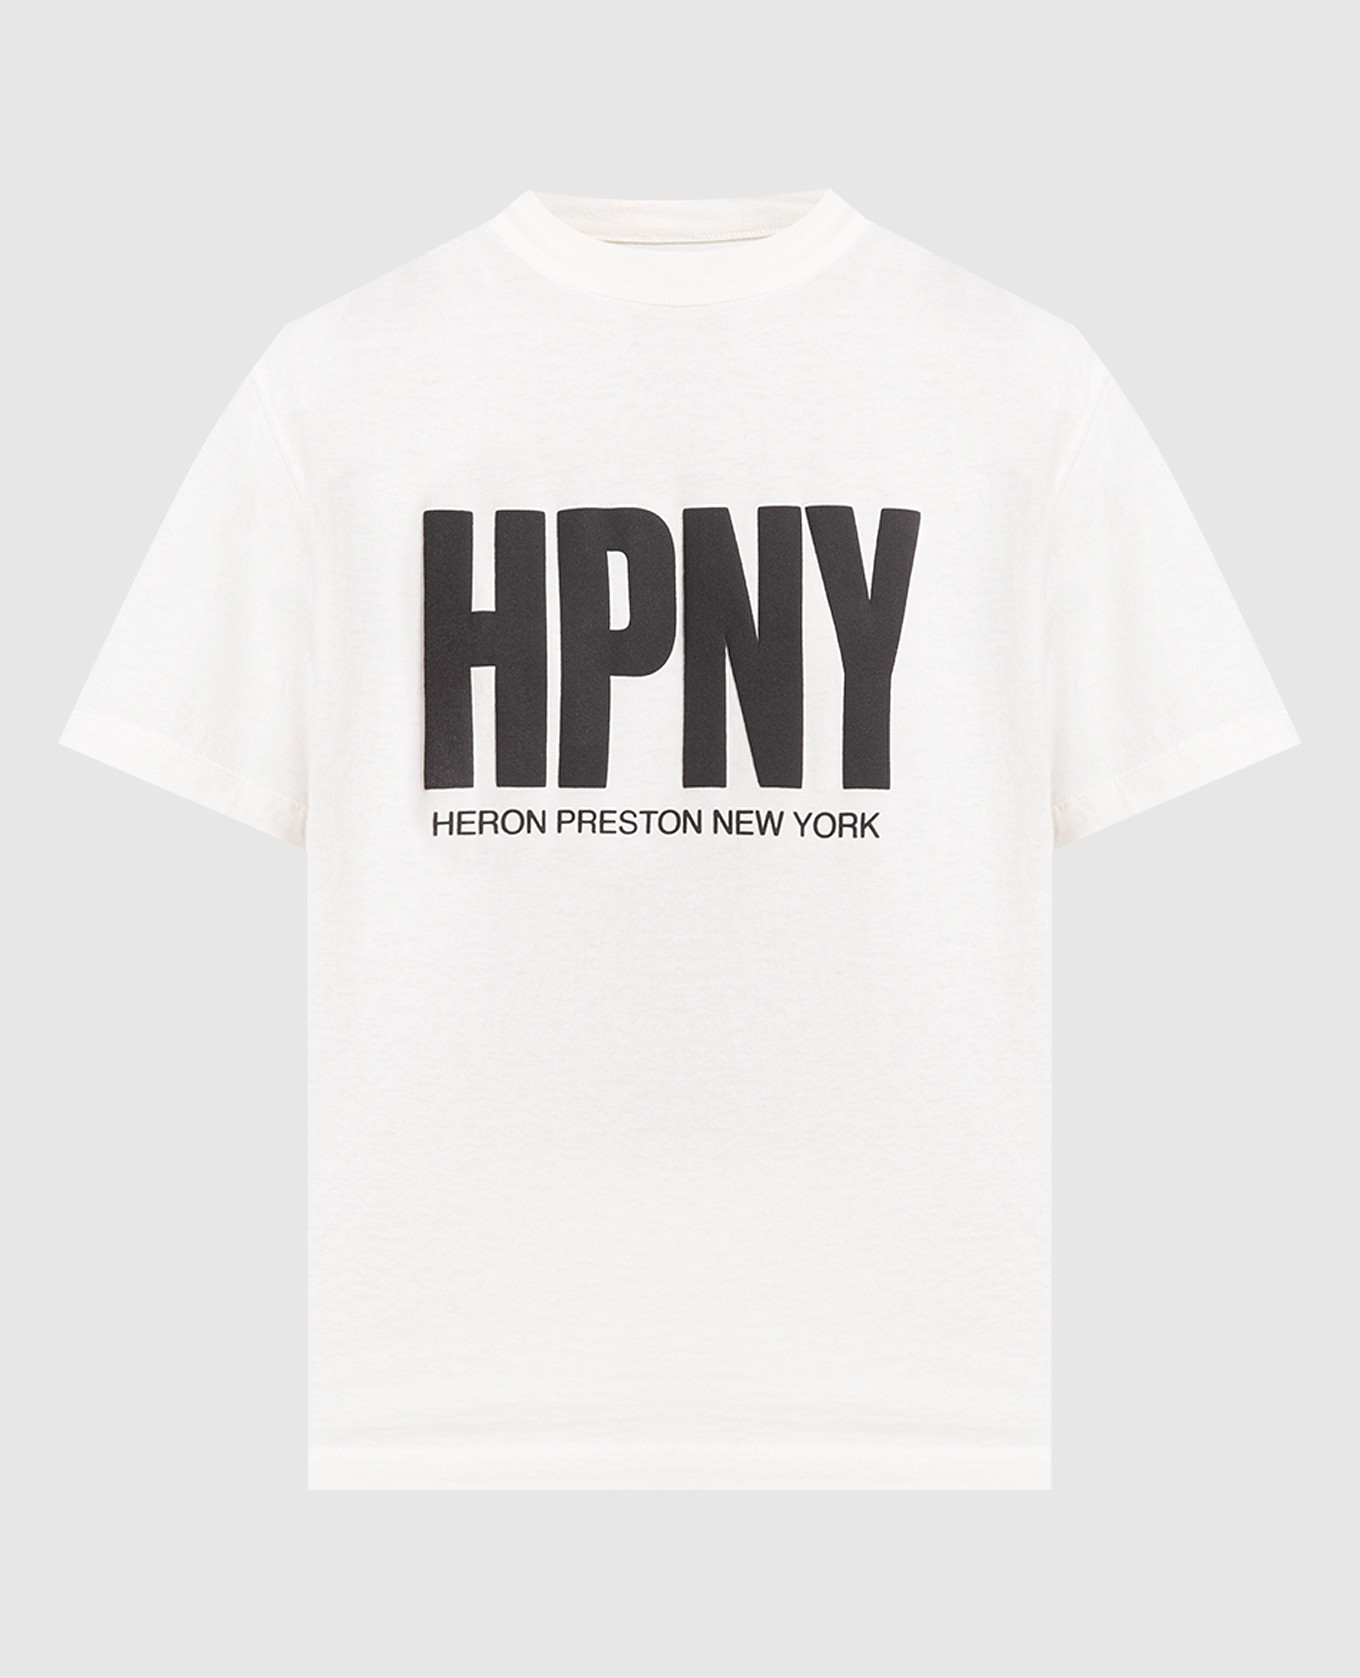 White t-shirt with contrasting HPNY logo